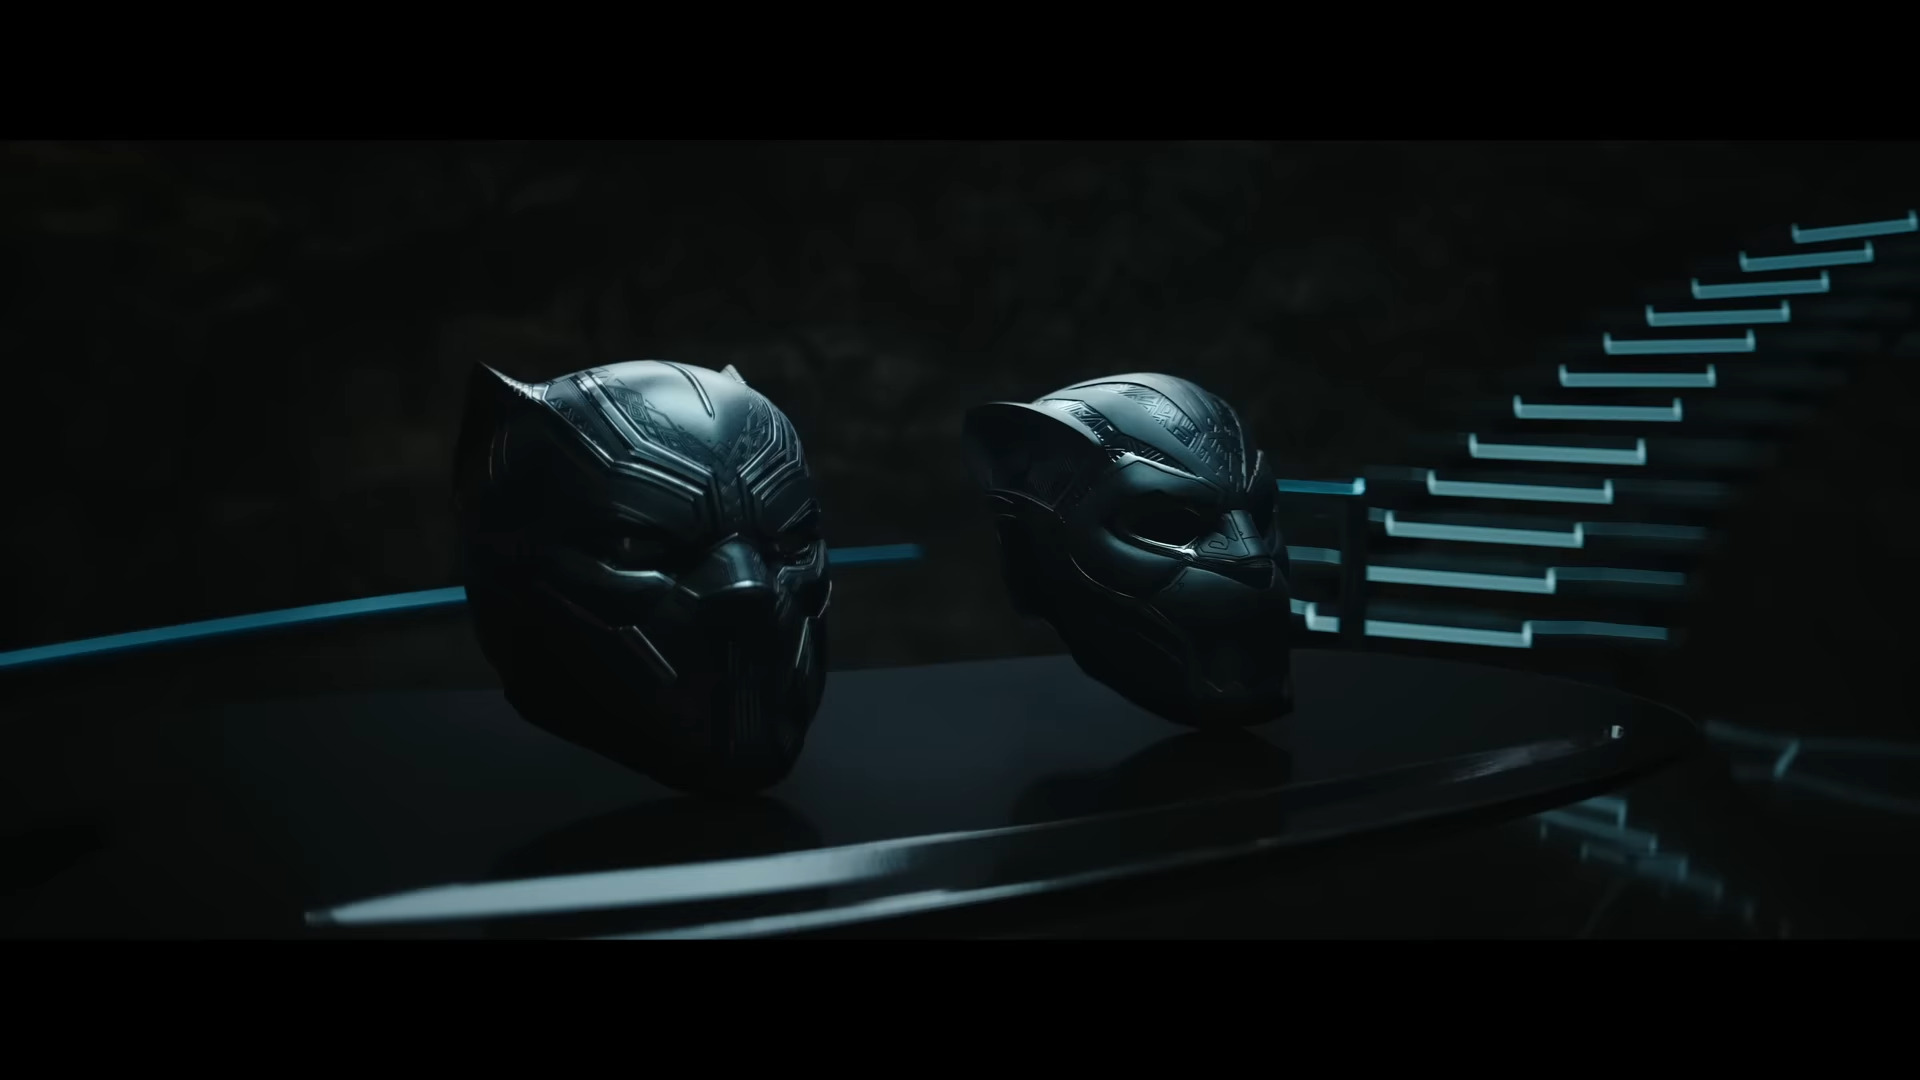 The helmets of both T'Challa (Chadwick Boseman) and Shuri (Letitia Wright) in Black Panther: Wakanda Forever (2022), Marvel Entertainment